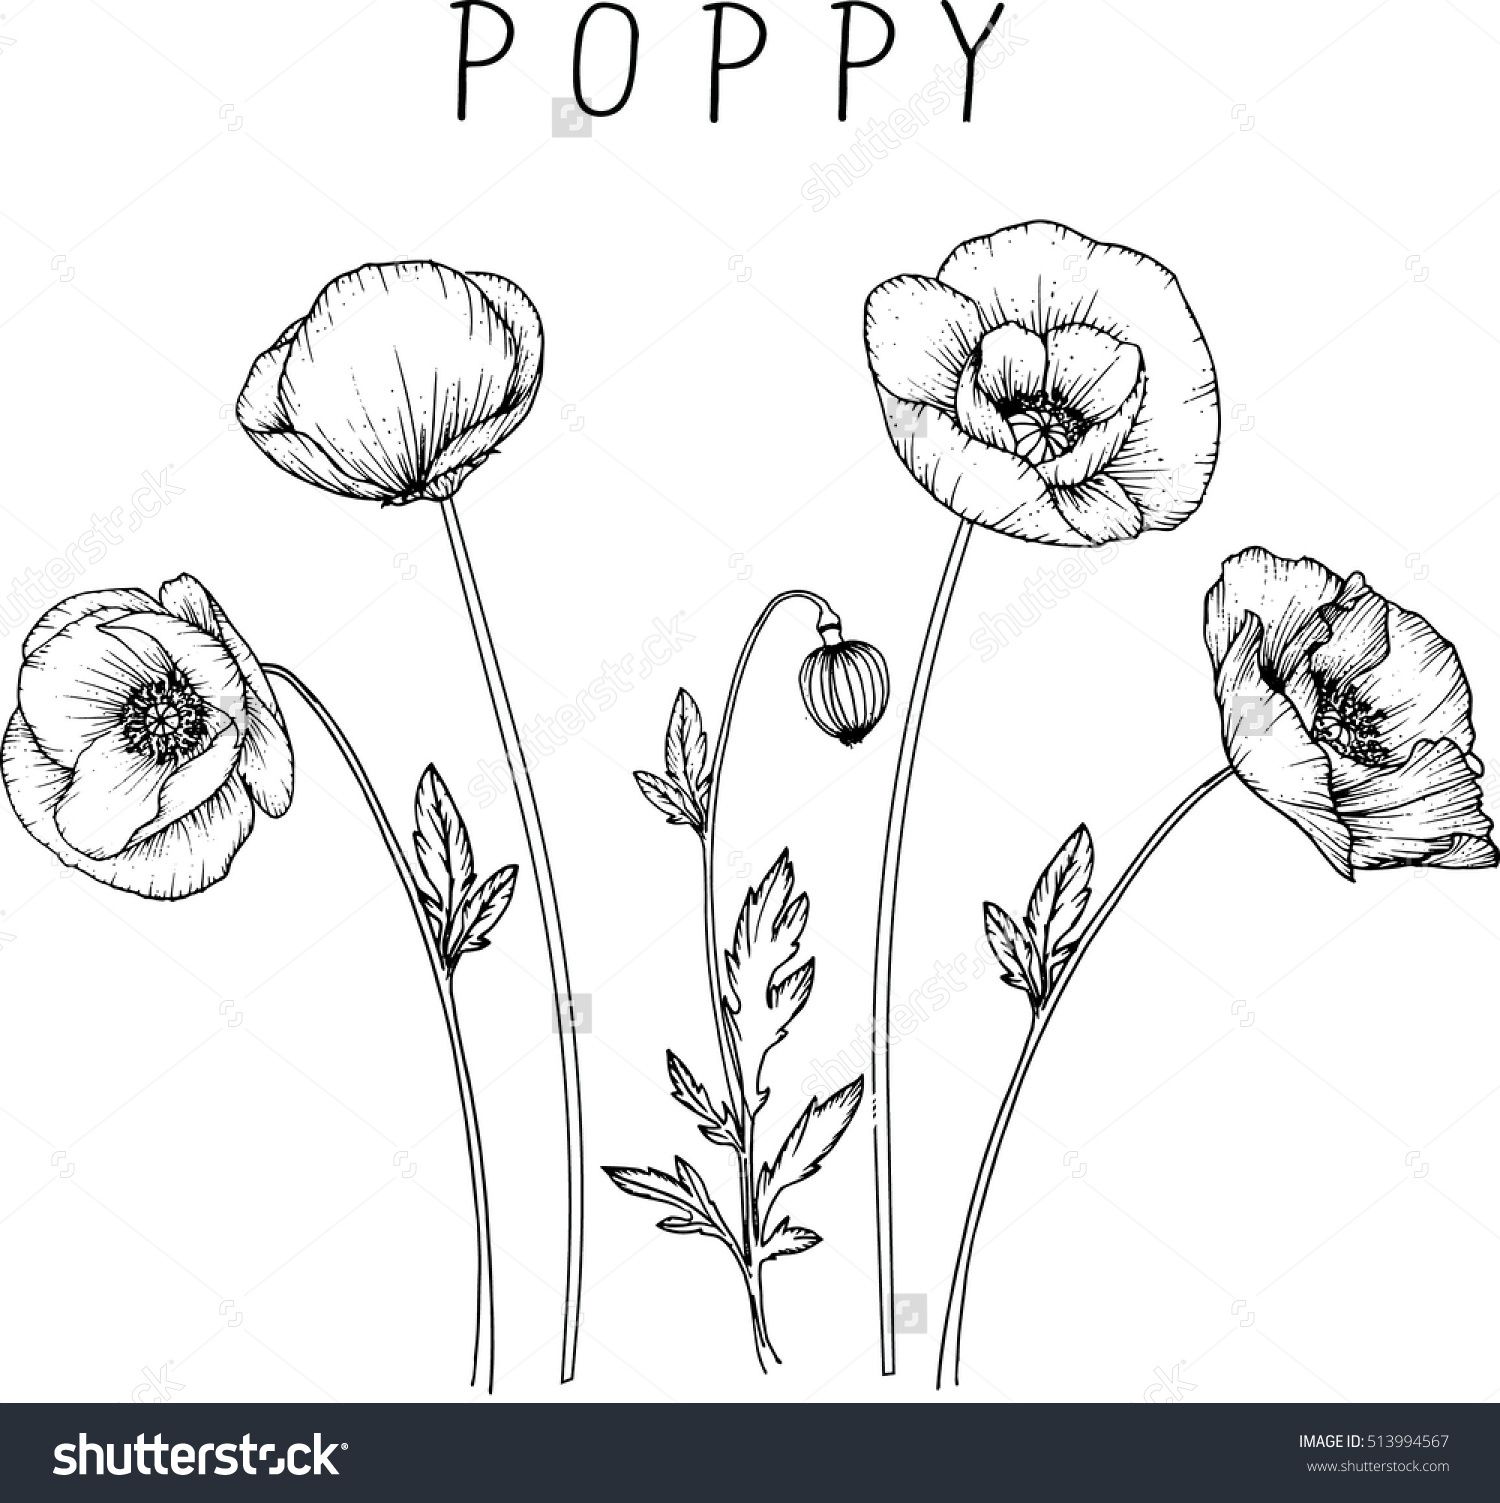 Poppy clipart drawing, Poppy drawing Transparent FREE for download on